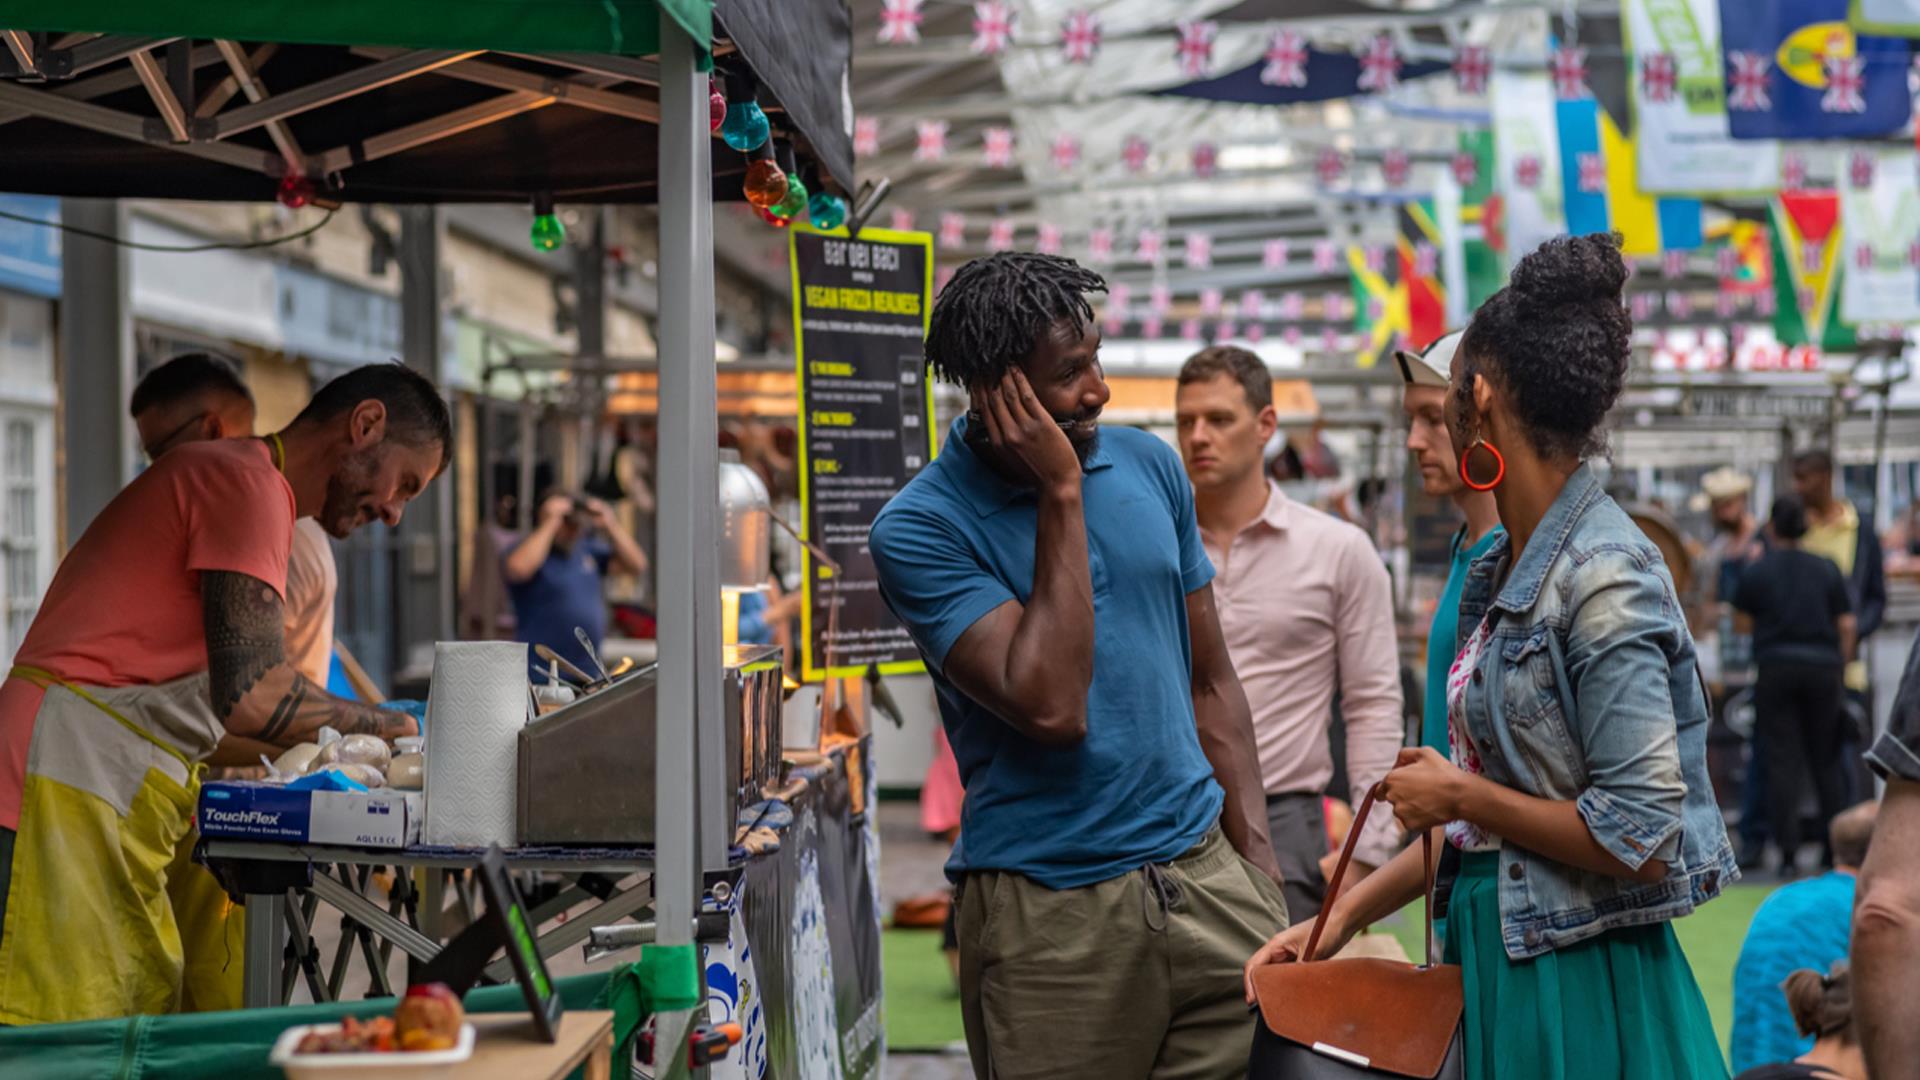 A couple talking at a market stall in Greenwich Market.